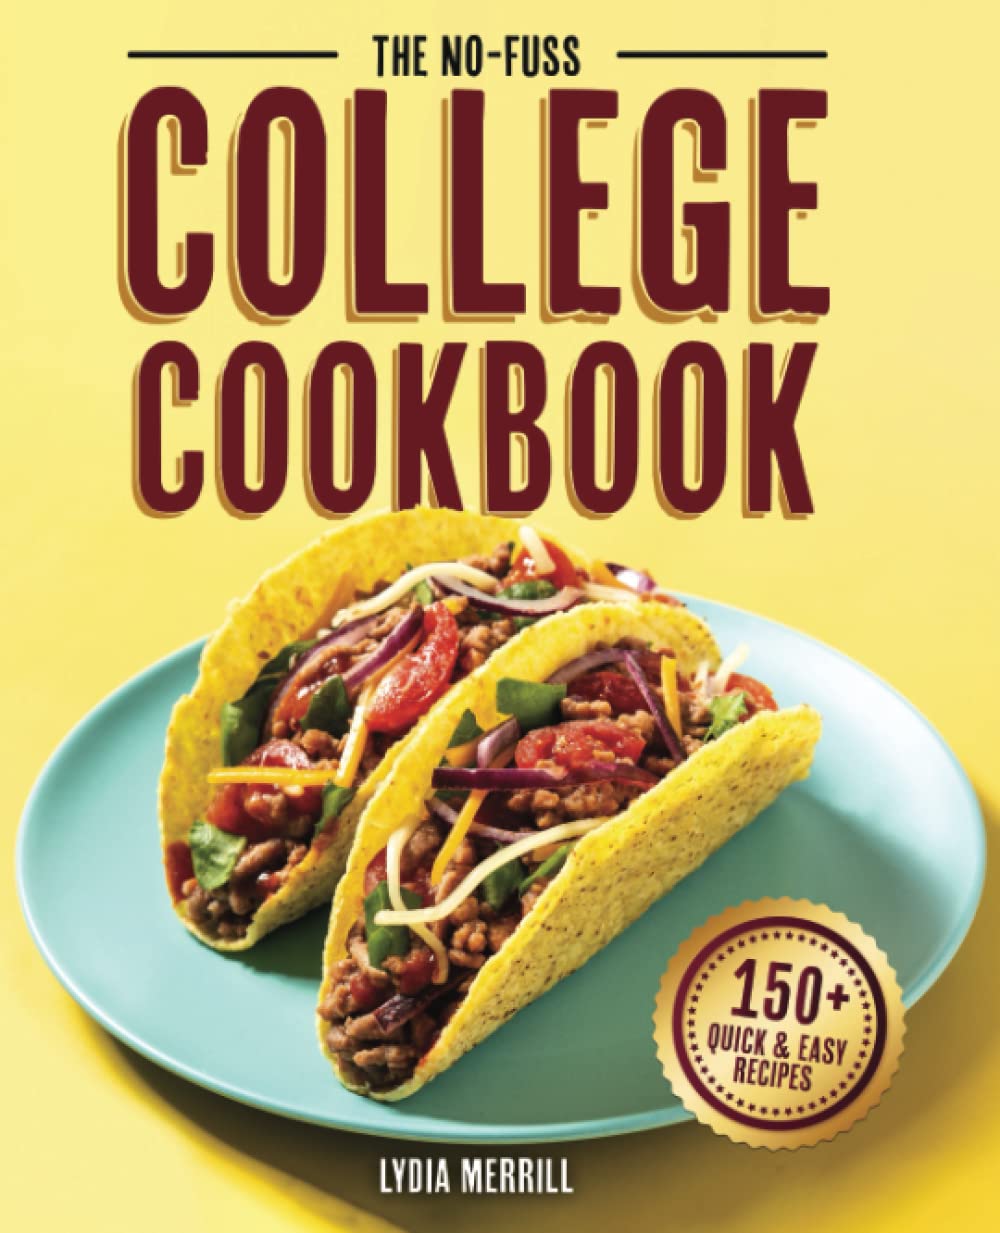 THE NO-FUSS COLLEGE COOKBOOK: Fuel Your Brain with 150+ Easy, Wholesome, and Affordable Recipes for Busy Students     Paperback – May 23, 2023